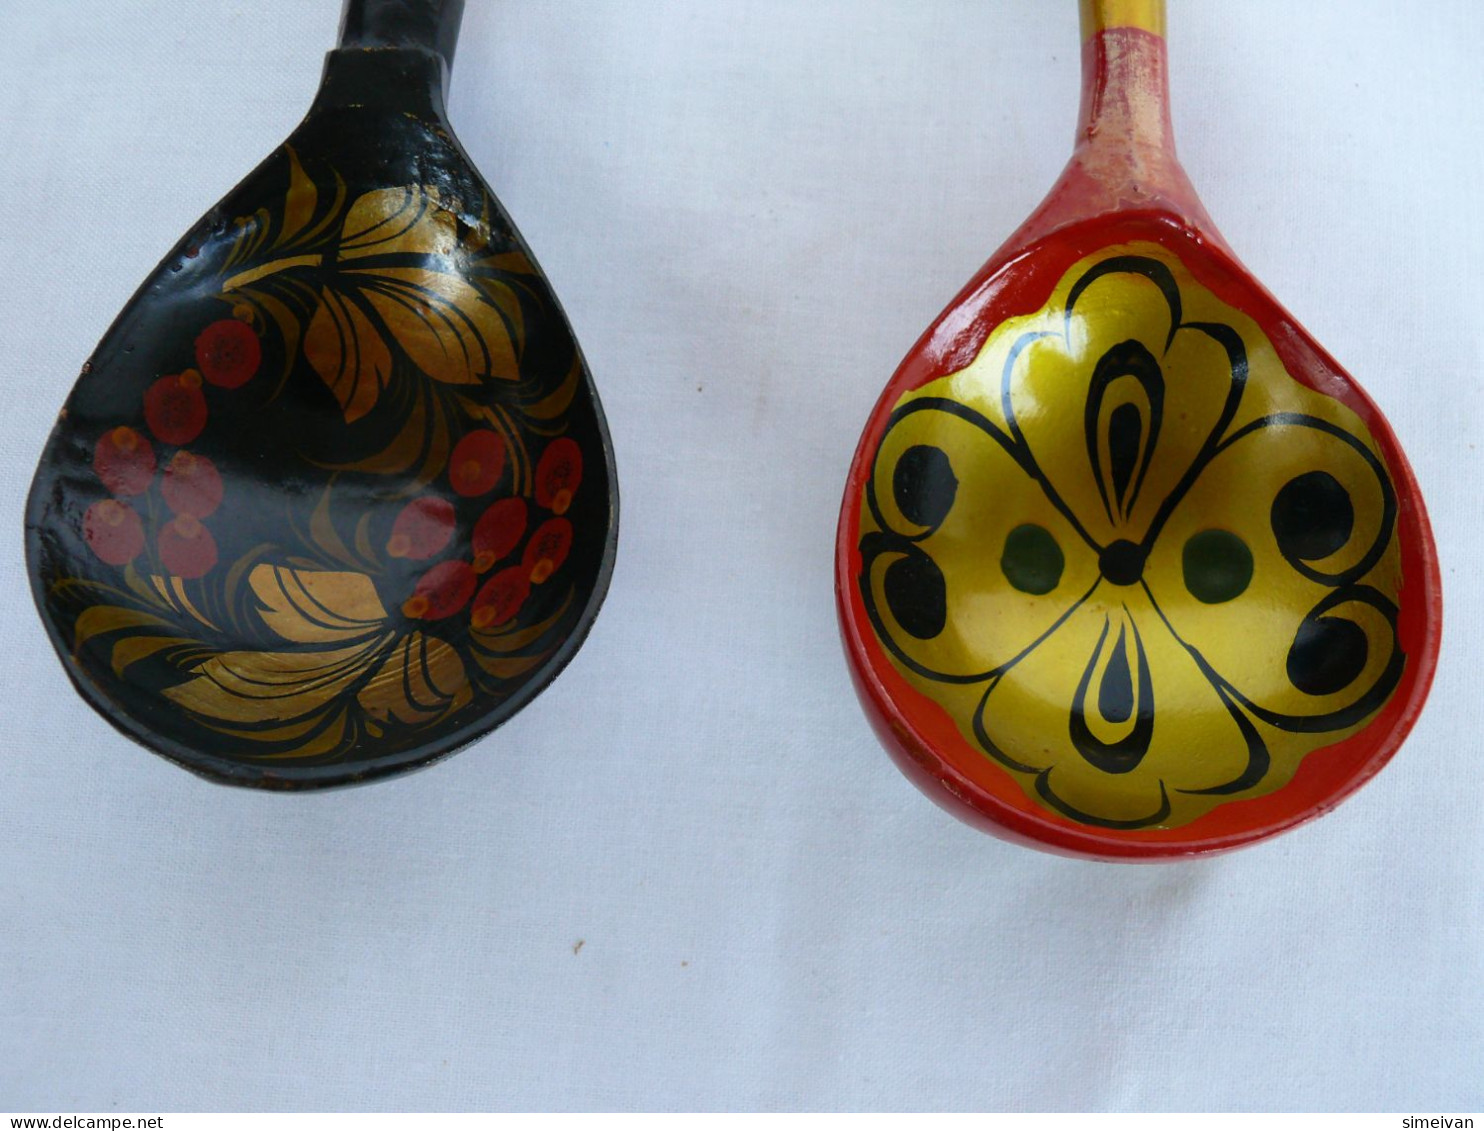 Vintage Khokhloma Wooden Spoons Hand Painted In Russia Russian Art #2191 - Lepels